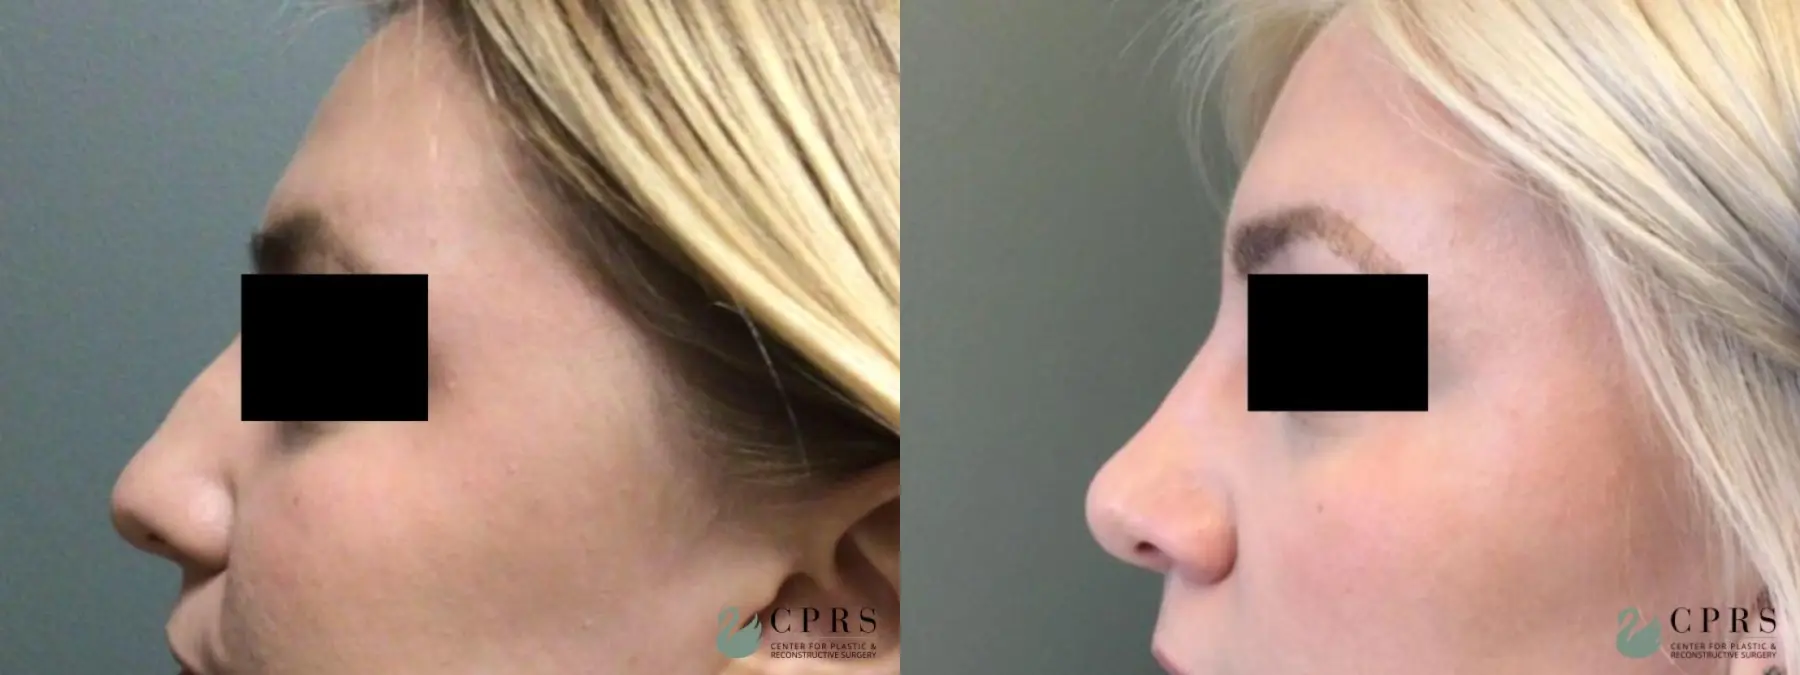 Rhinoplasty: Patient 6 - Before and After 3